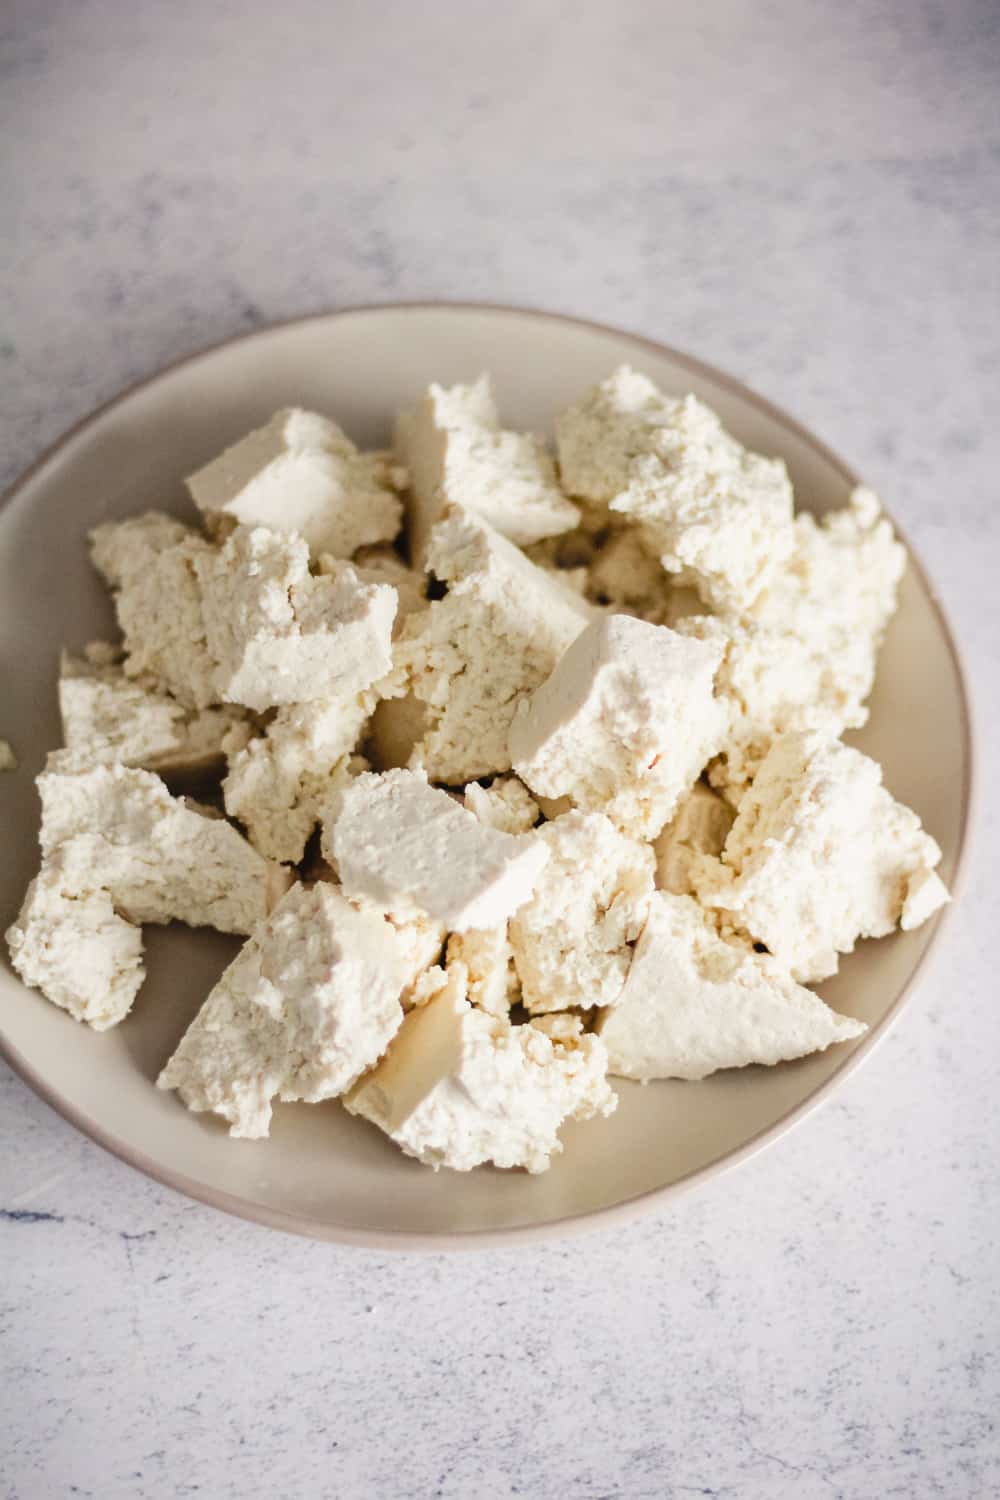 Tofu torn into bite sized pieces on a plate.